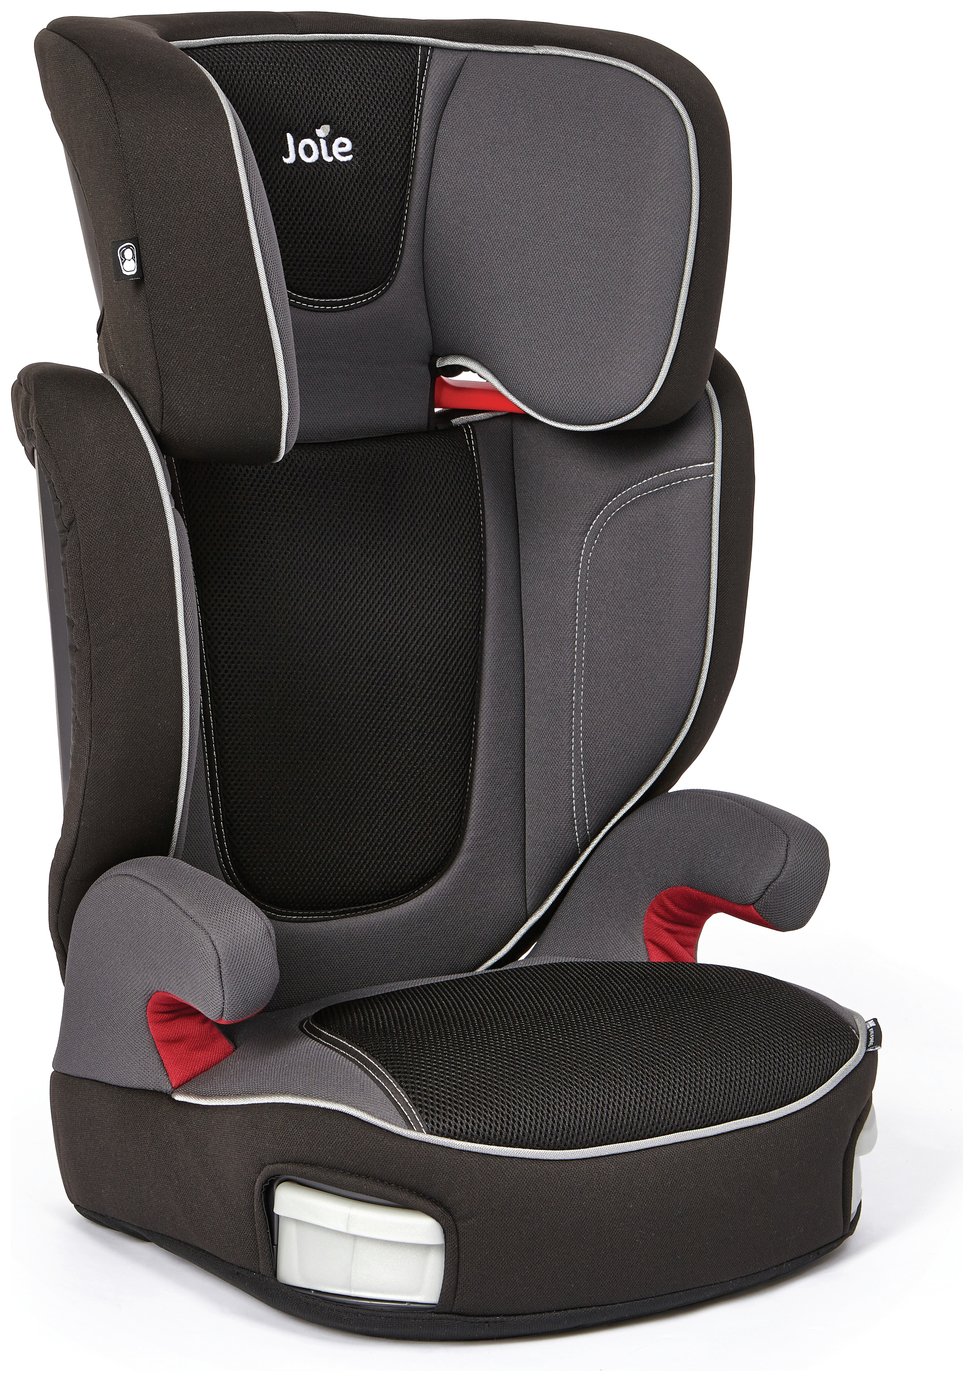 Joie Trillo Plus Group 2/3 Car Seat - Midnight Blue